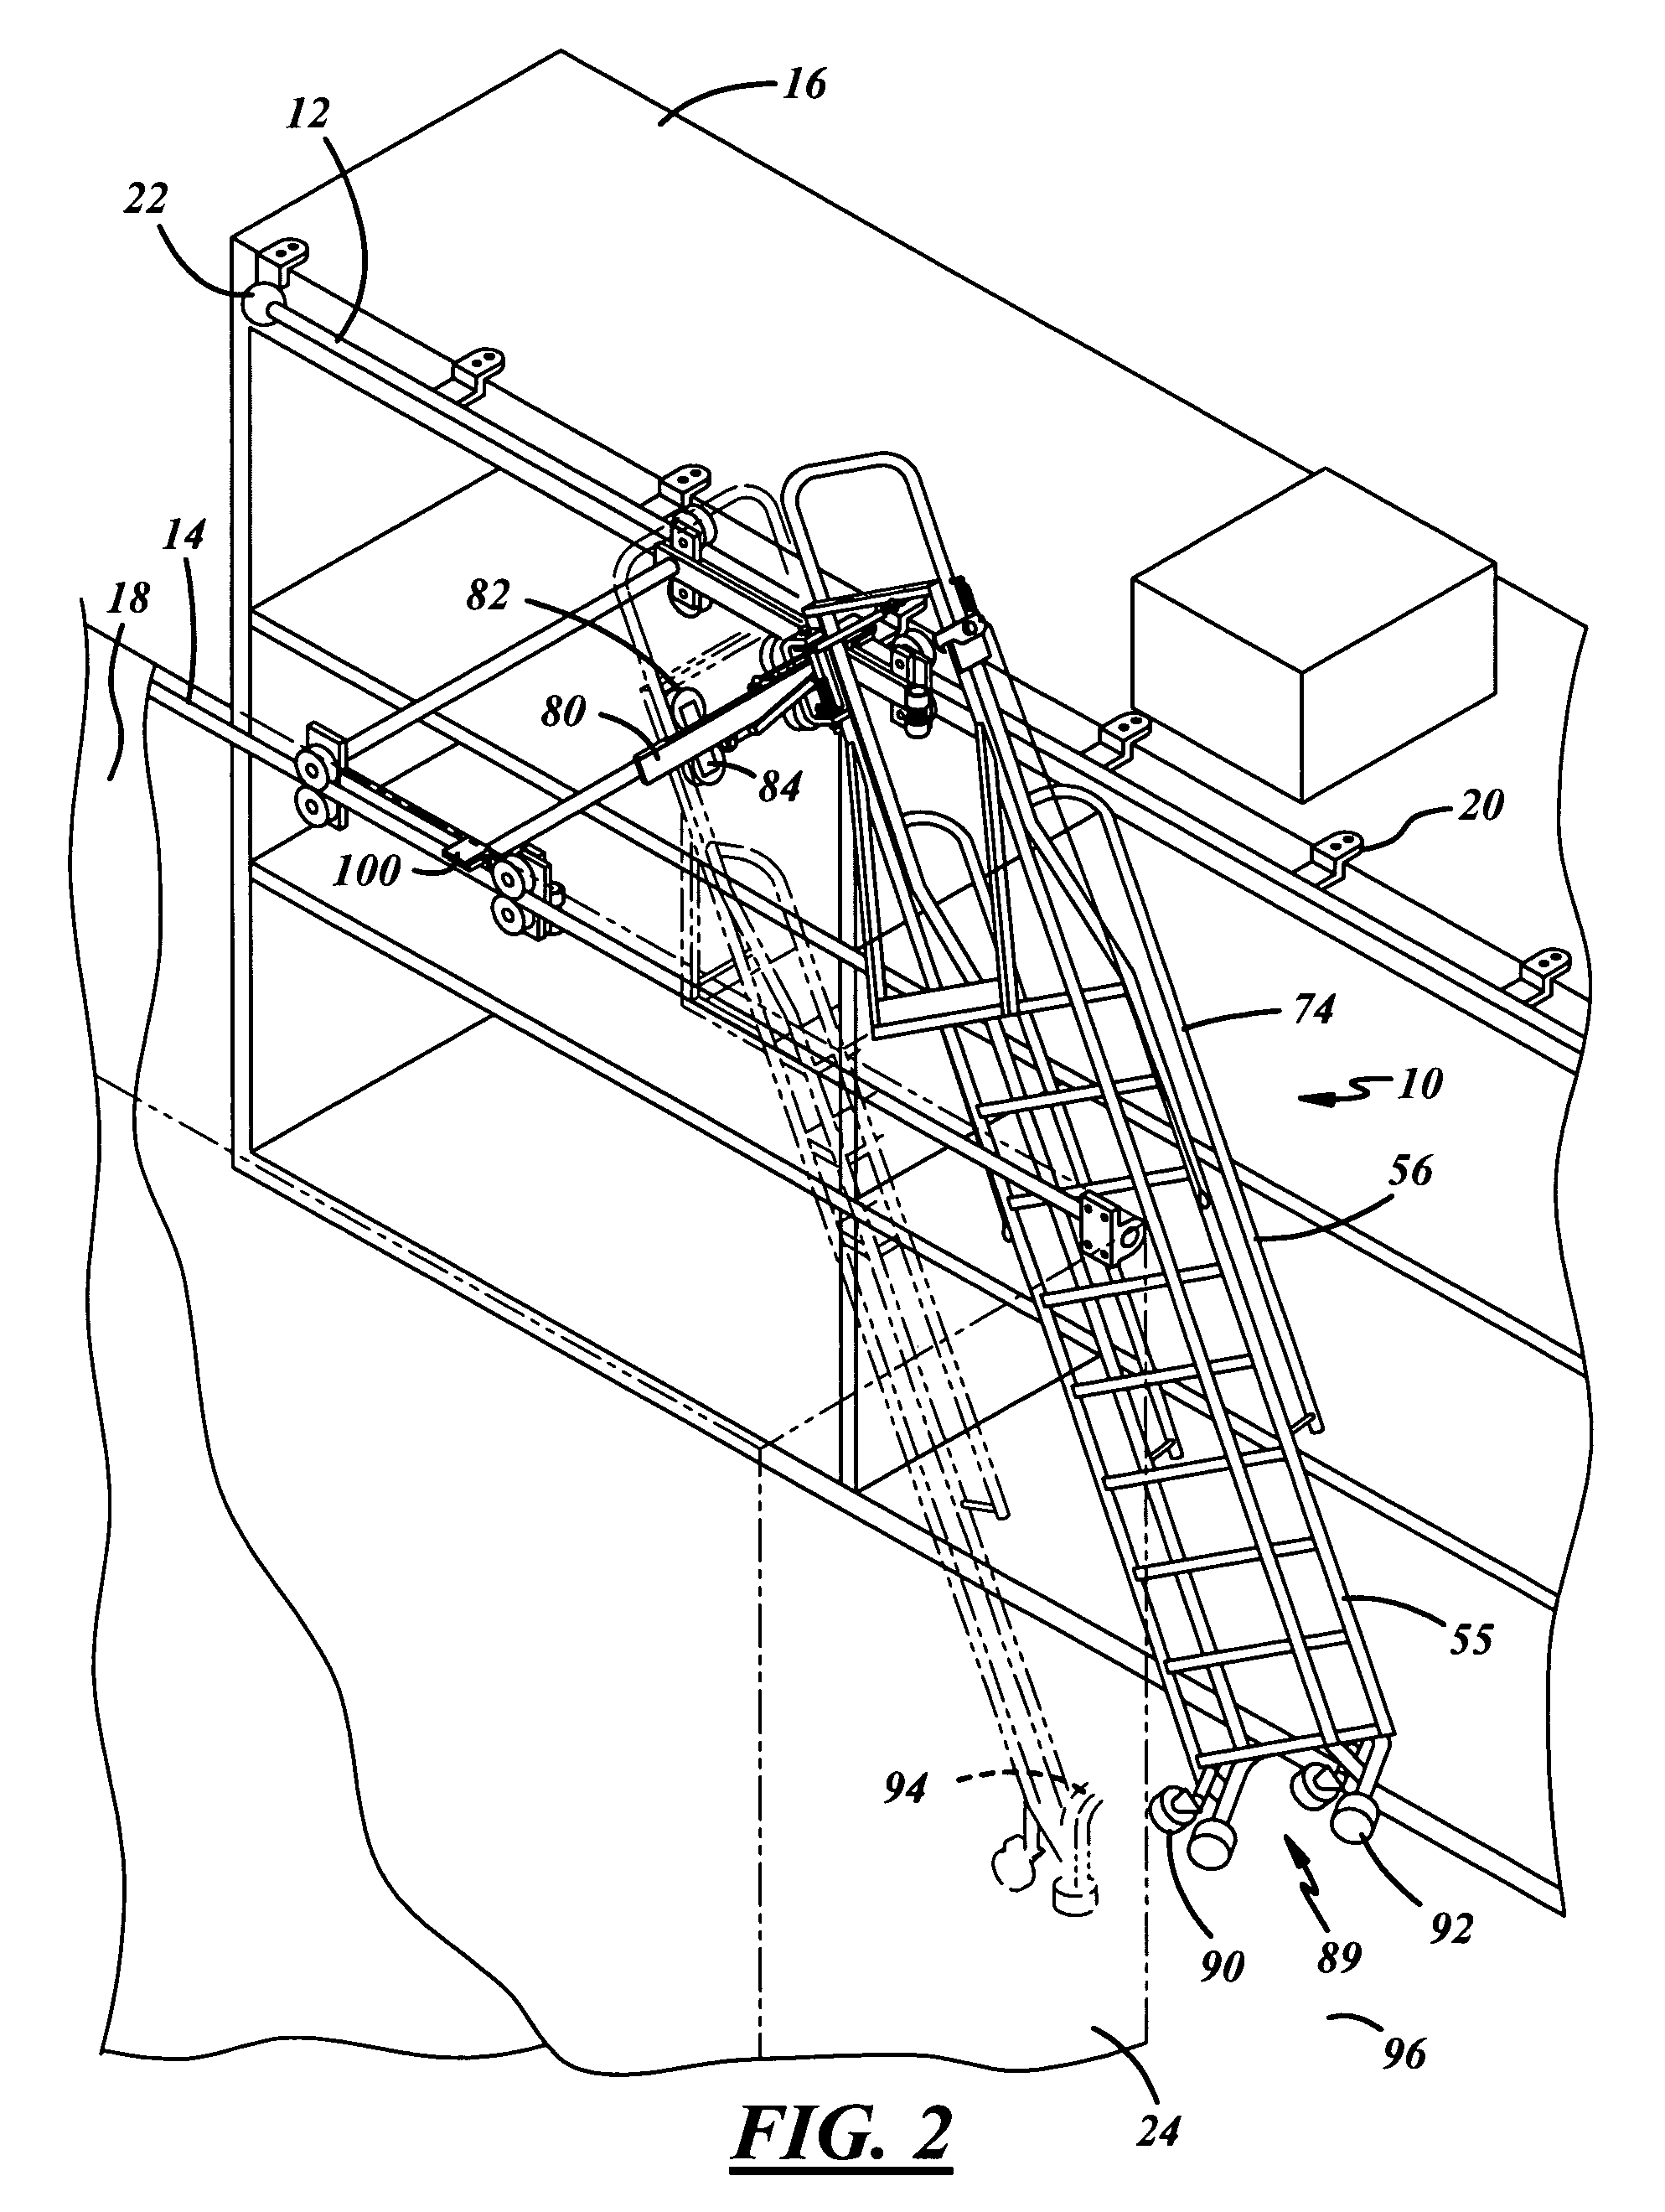 Dual track ladder with brake mechanism that is automatically applied to the upper tracks to hold the ladder in place during use